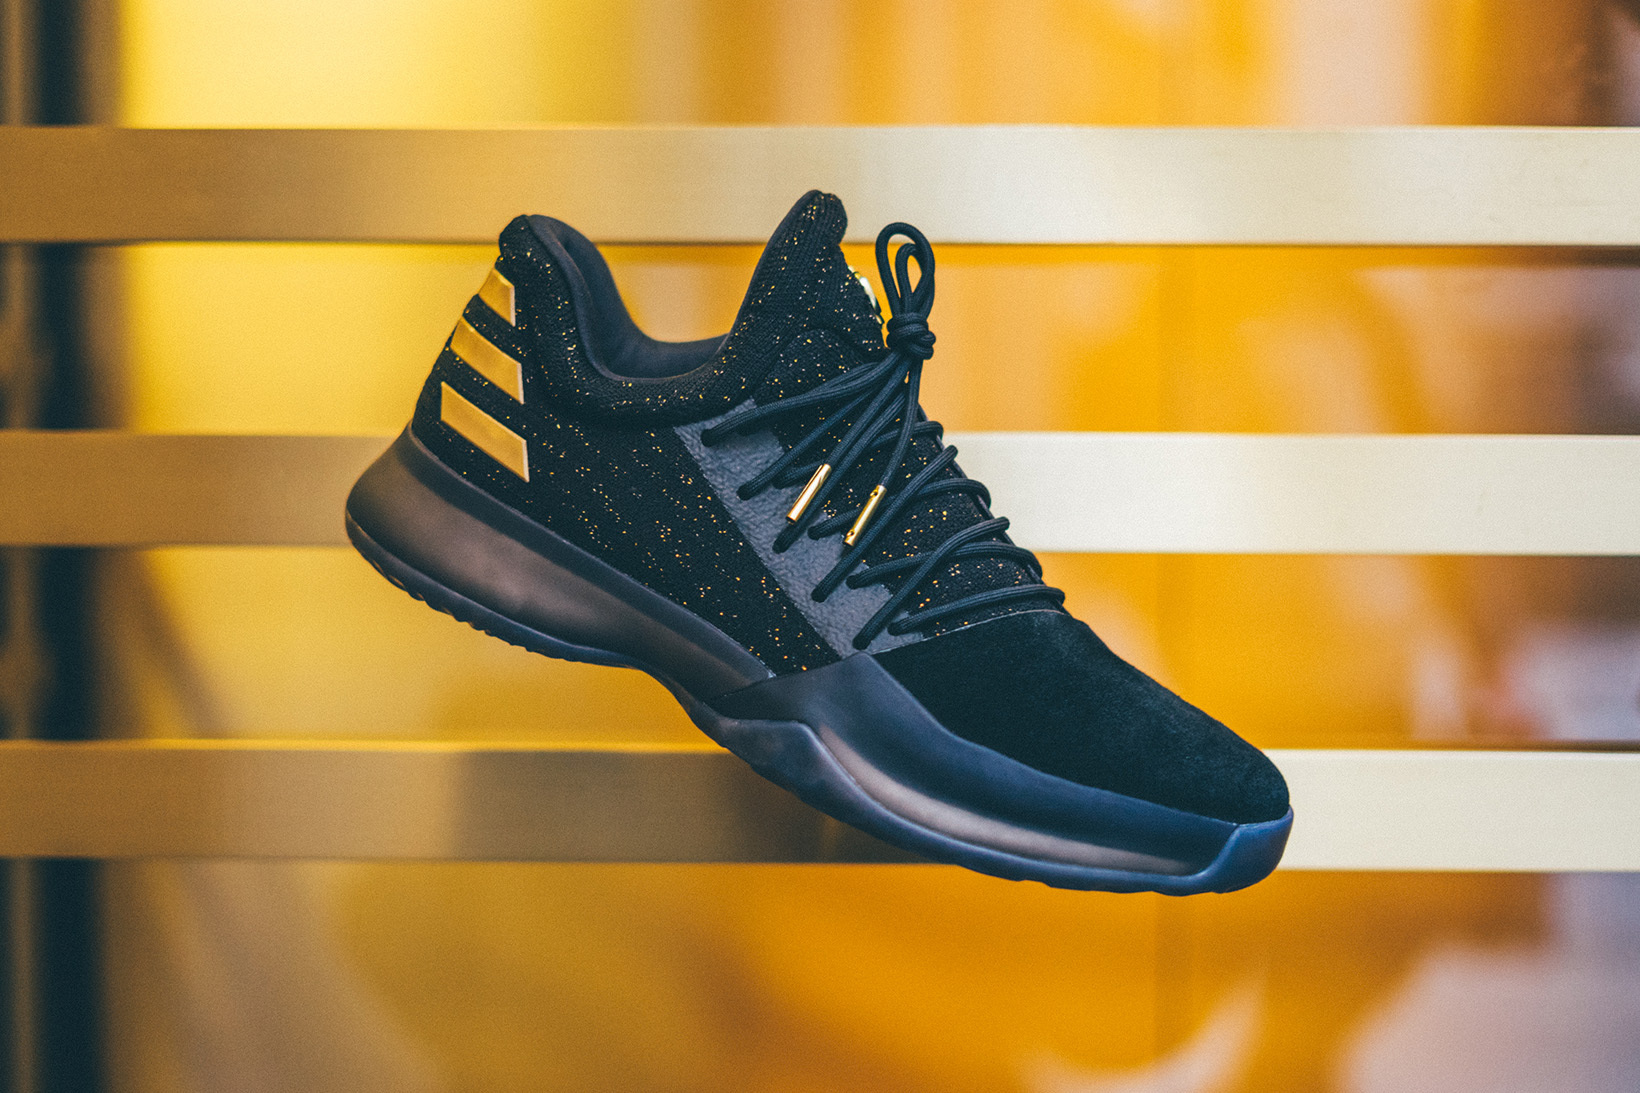 adidas-reveals-harden-vol-1-imma-be-a-star-colorway-3